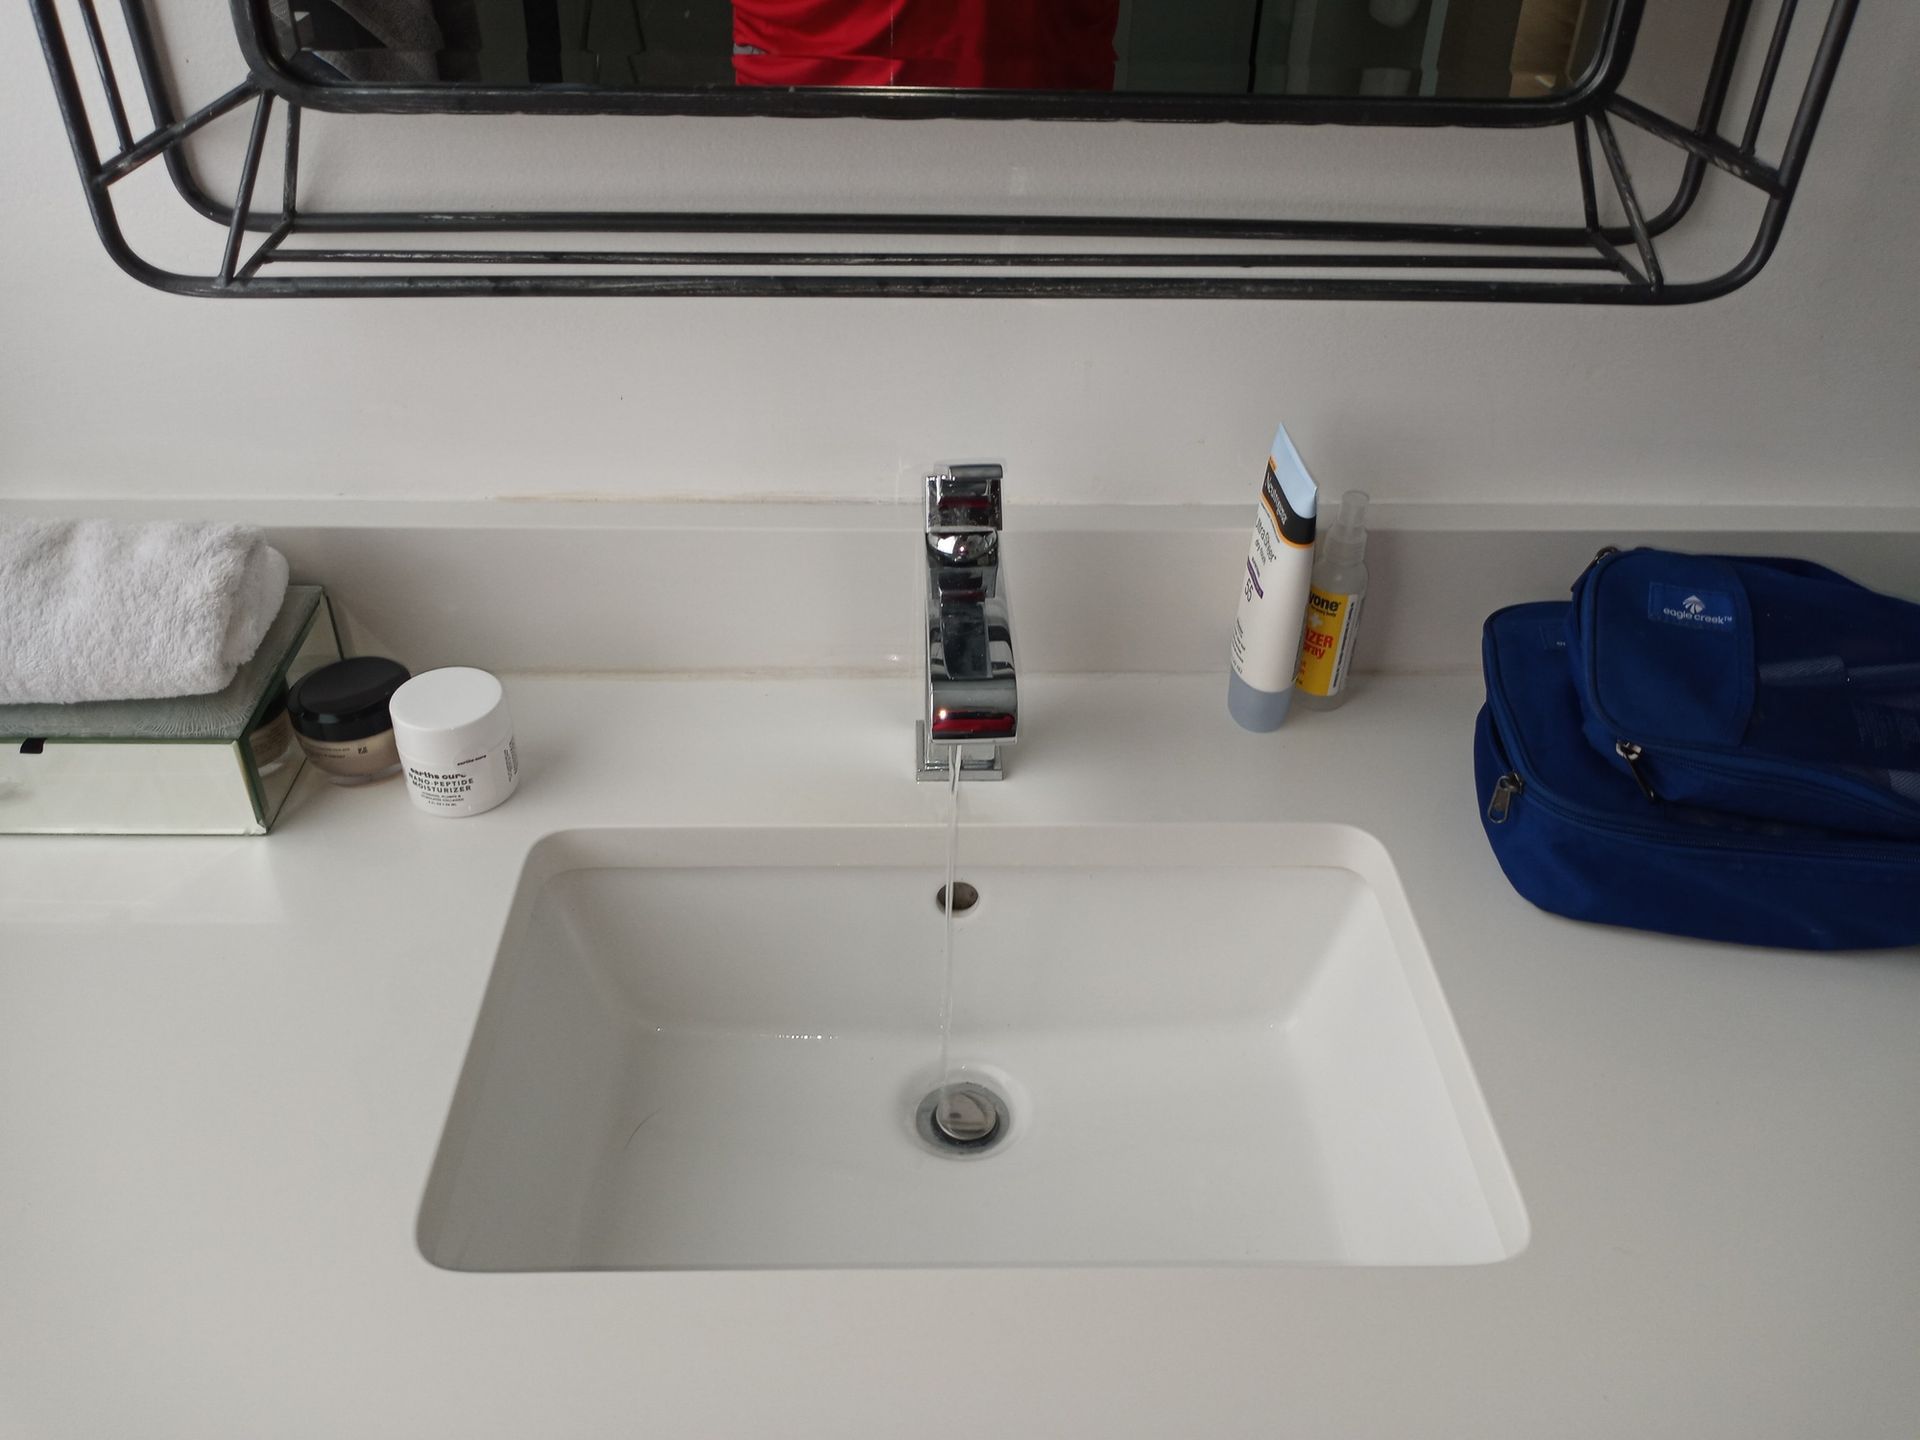 a bathroom sink with a faucet and a blue bag on the counter .